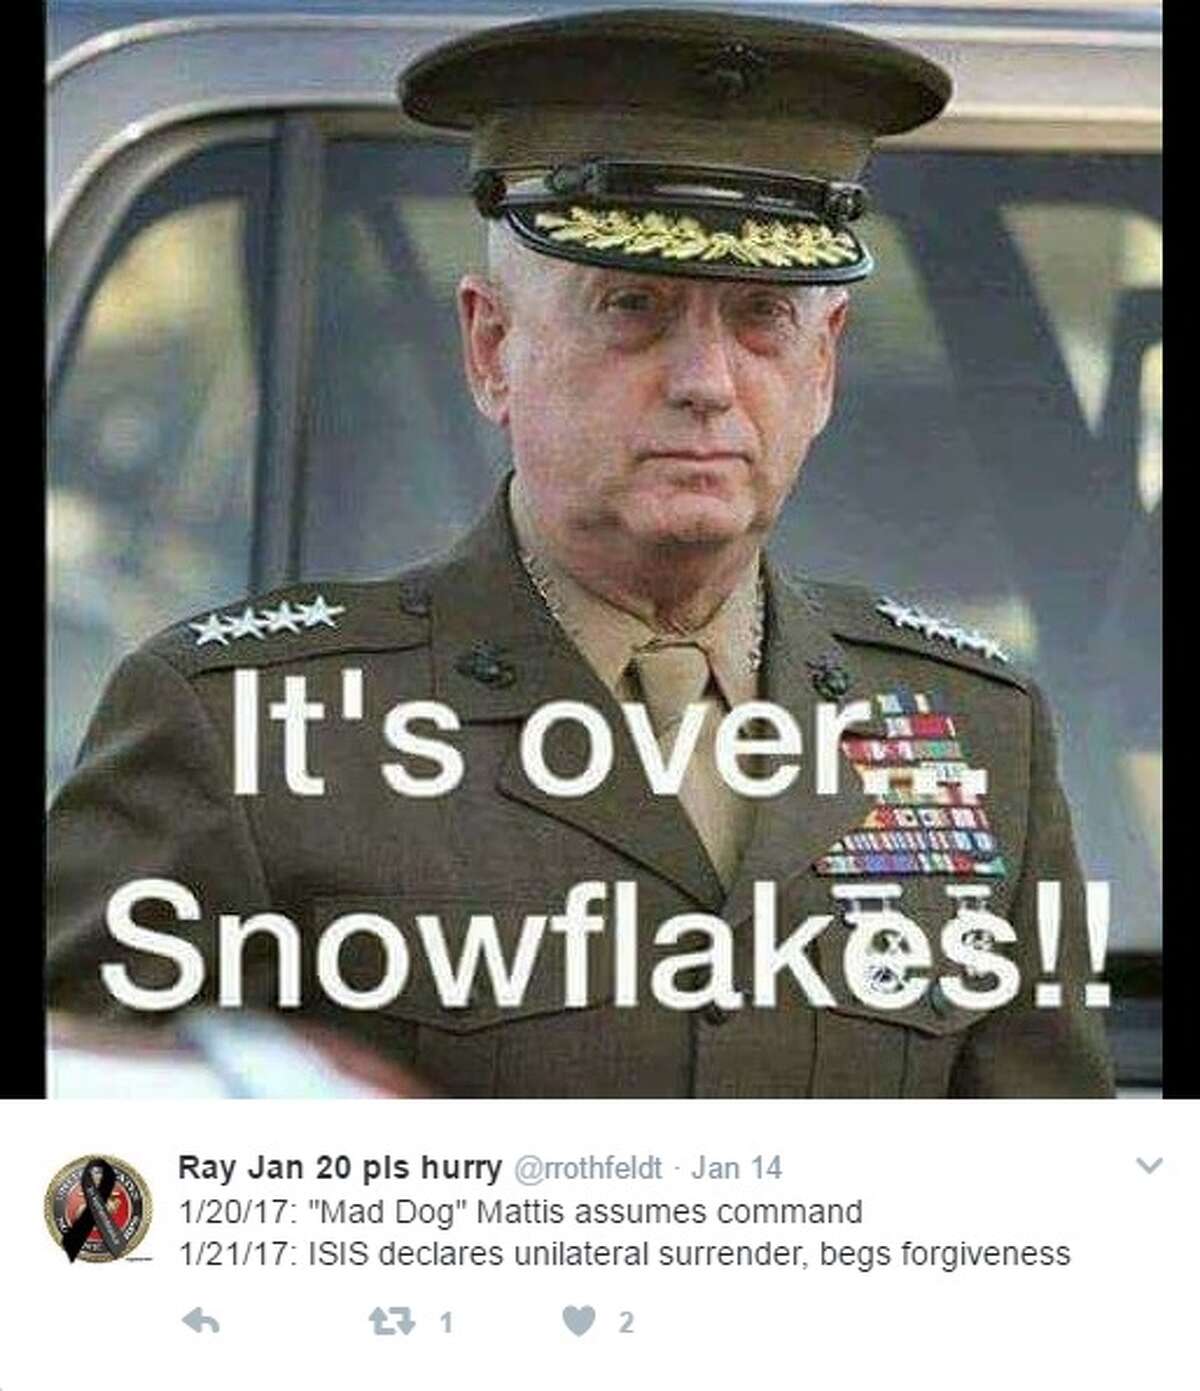 Since Marine Gen. James 'Mad Dog' Mattis was nominated by President Trump to be Defense Secretary, his fans have taken it upon themselves to create memes in his honor.